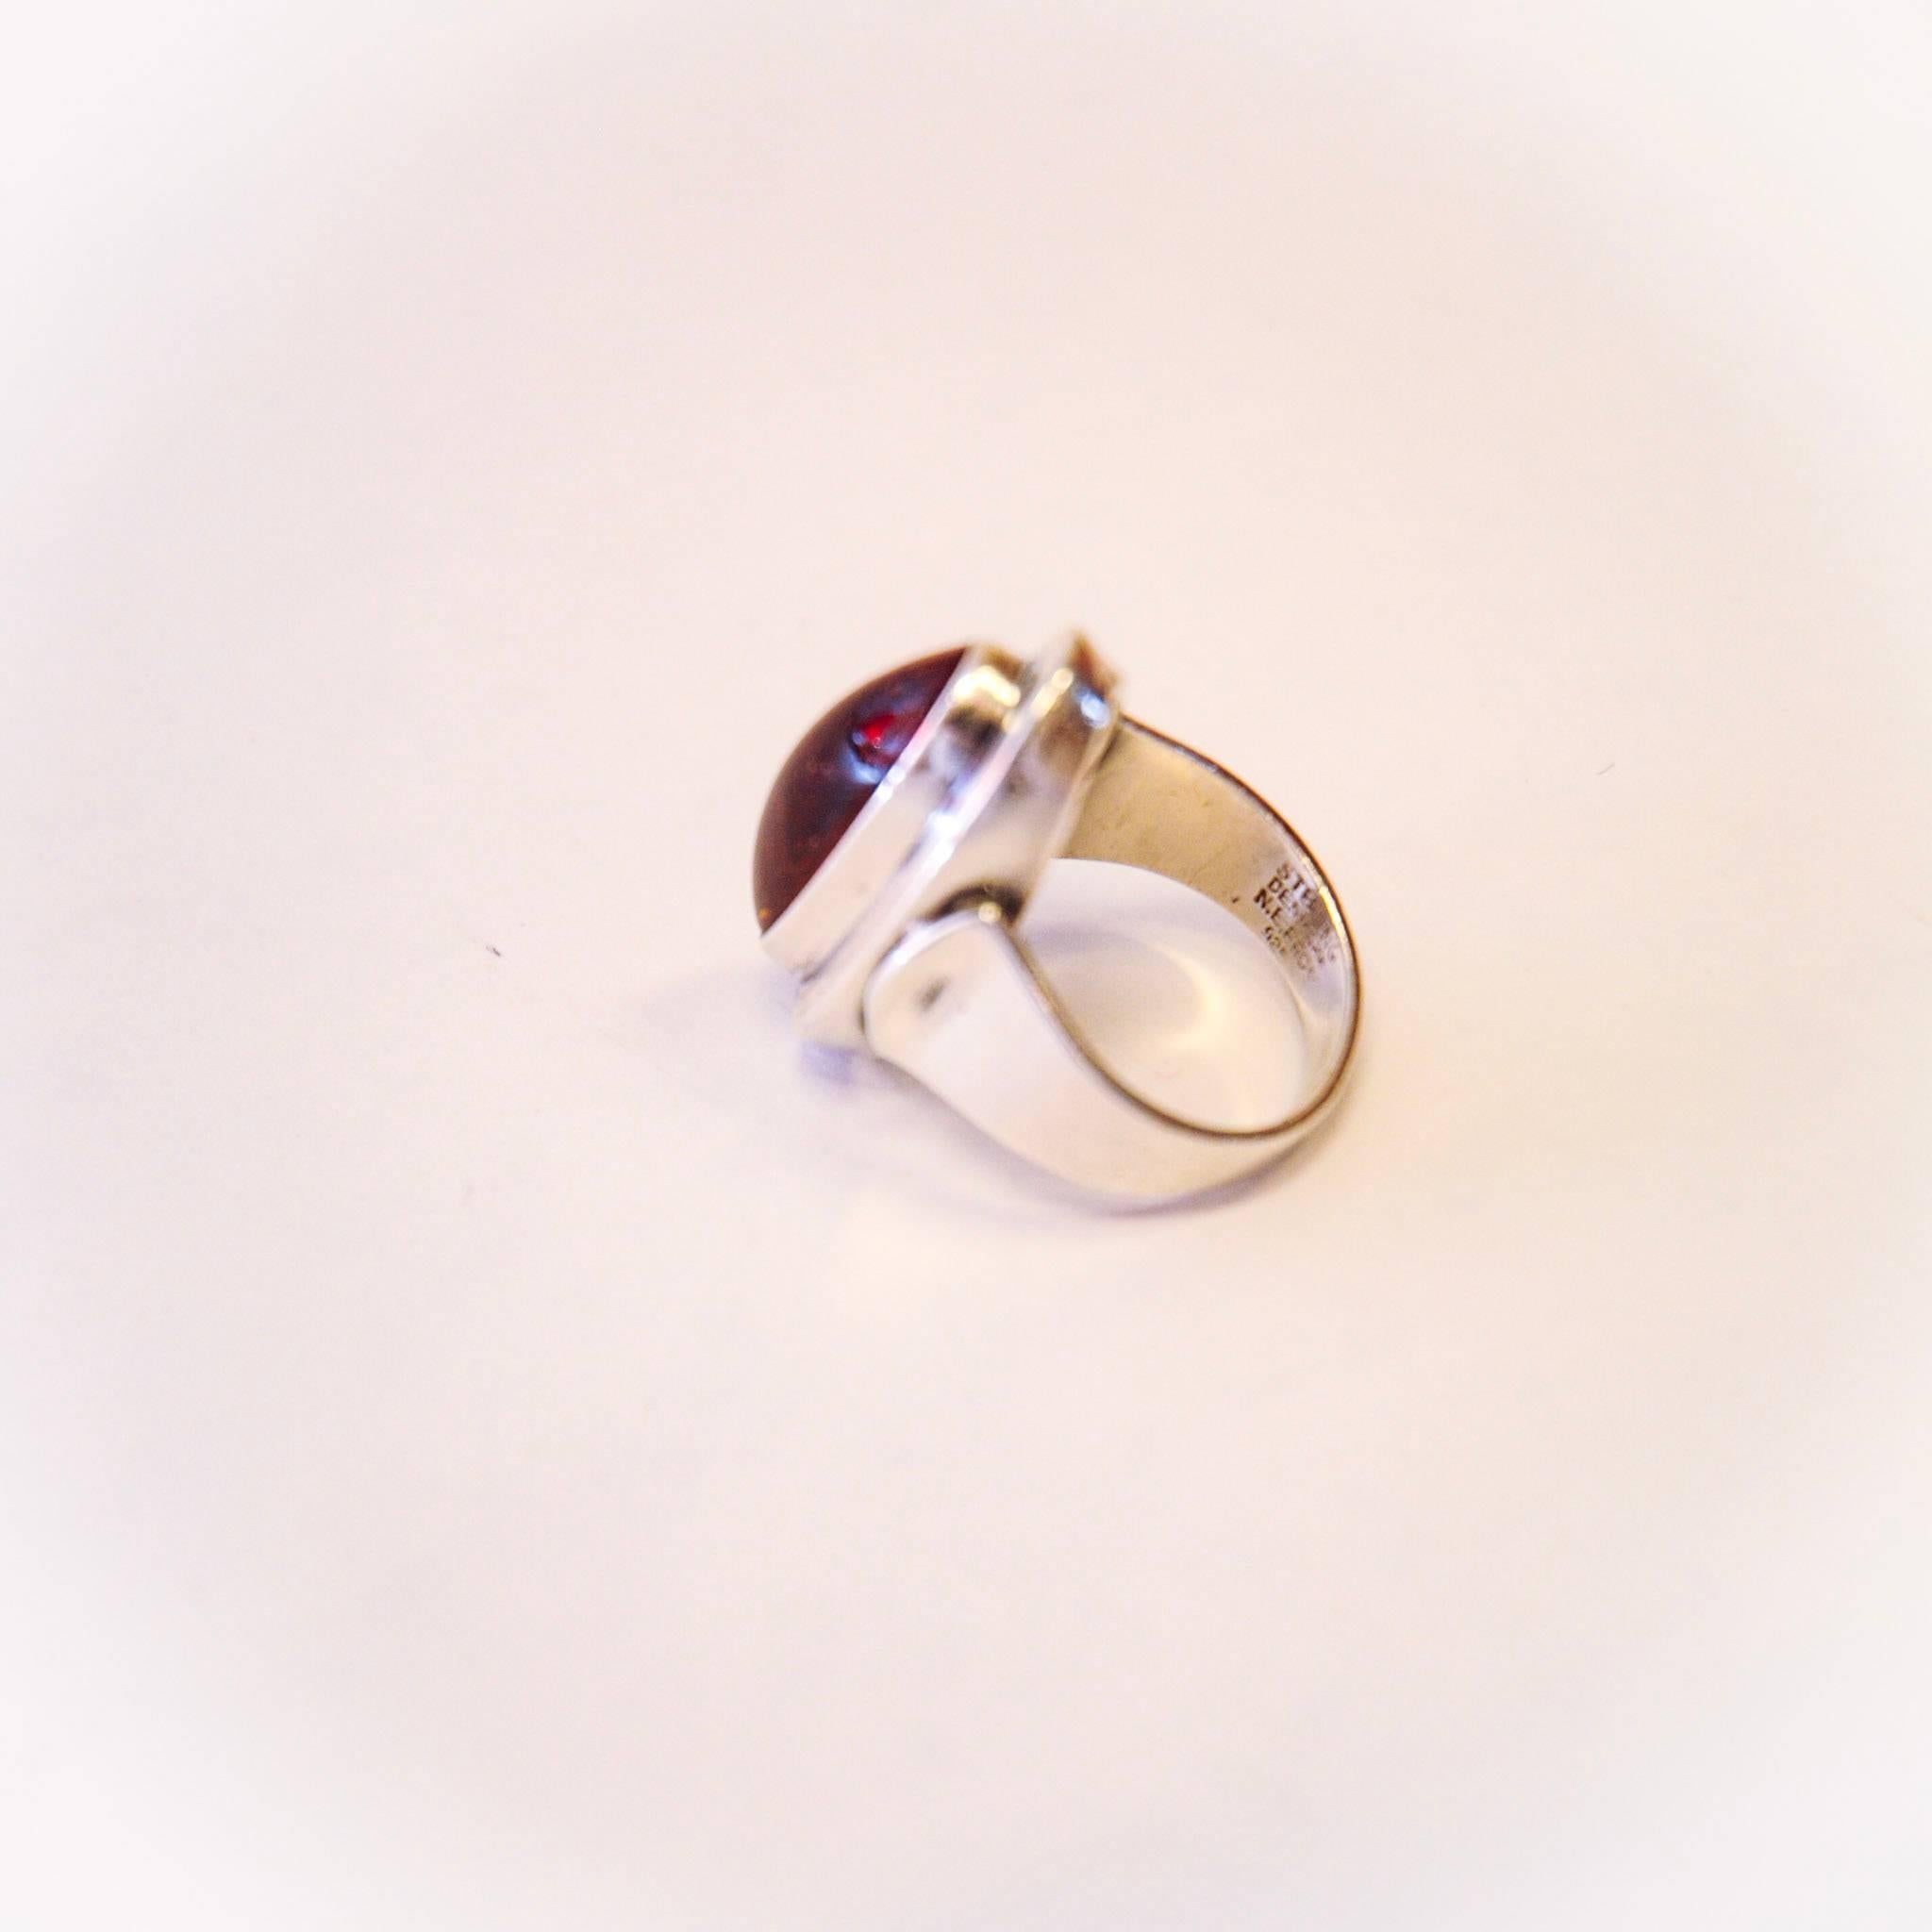 Attractive sterling silver ring with amber from the last midcentury, made by Nils Erik from, Denmark. (Nakskov, 1944-2009). Stamped. Sterling, Denmark, 925S & N. E. From. Size 52 mm. Perfect vintage condition.
 